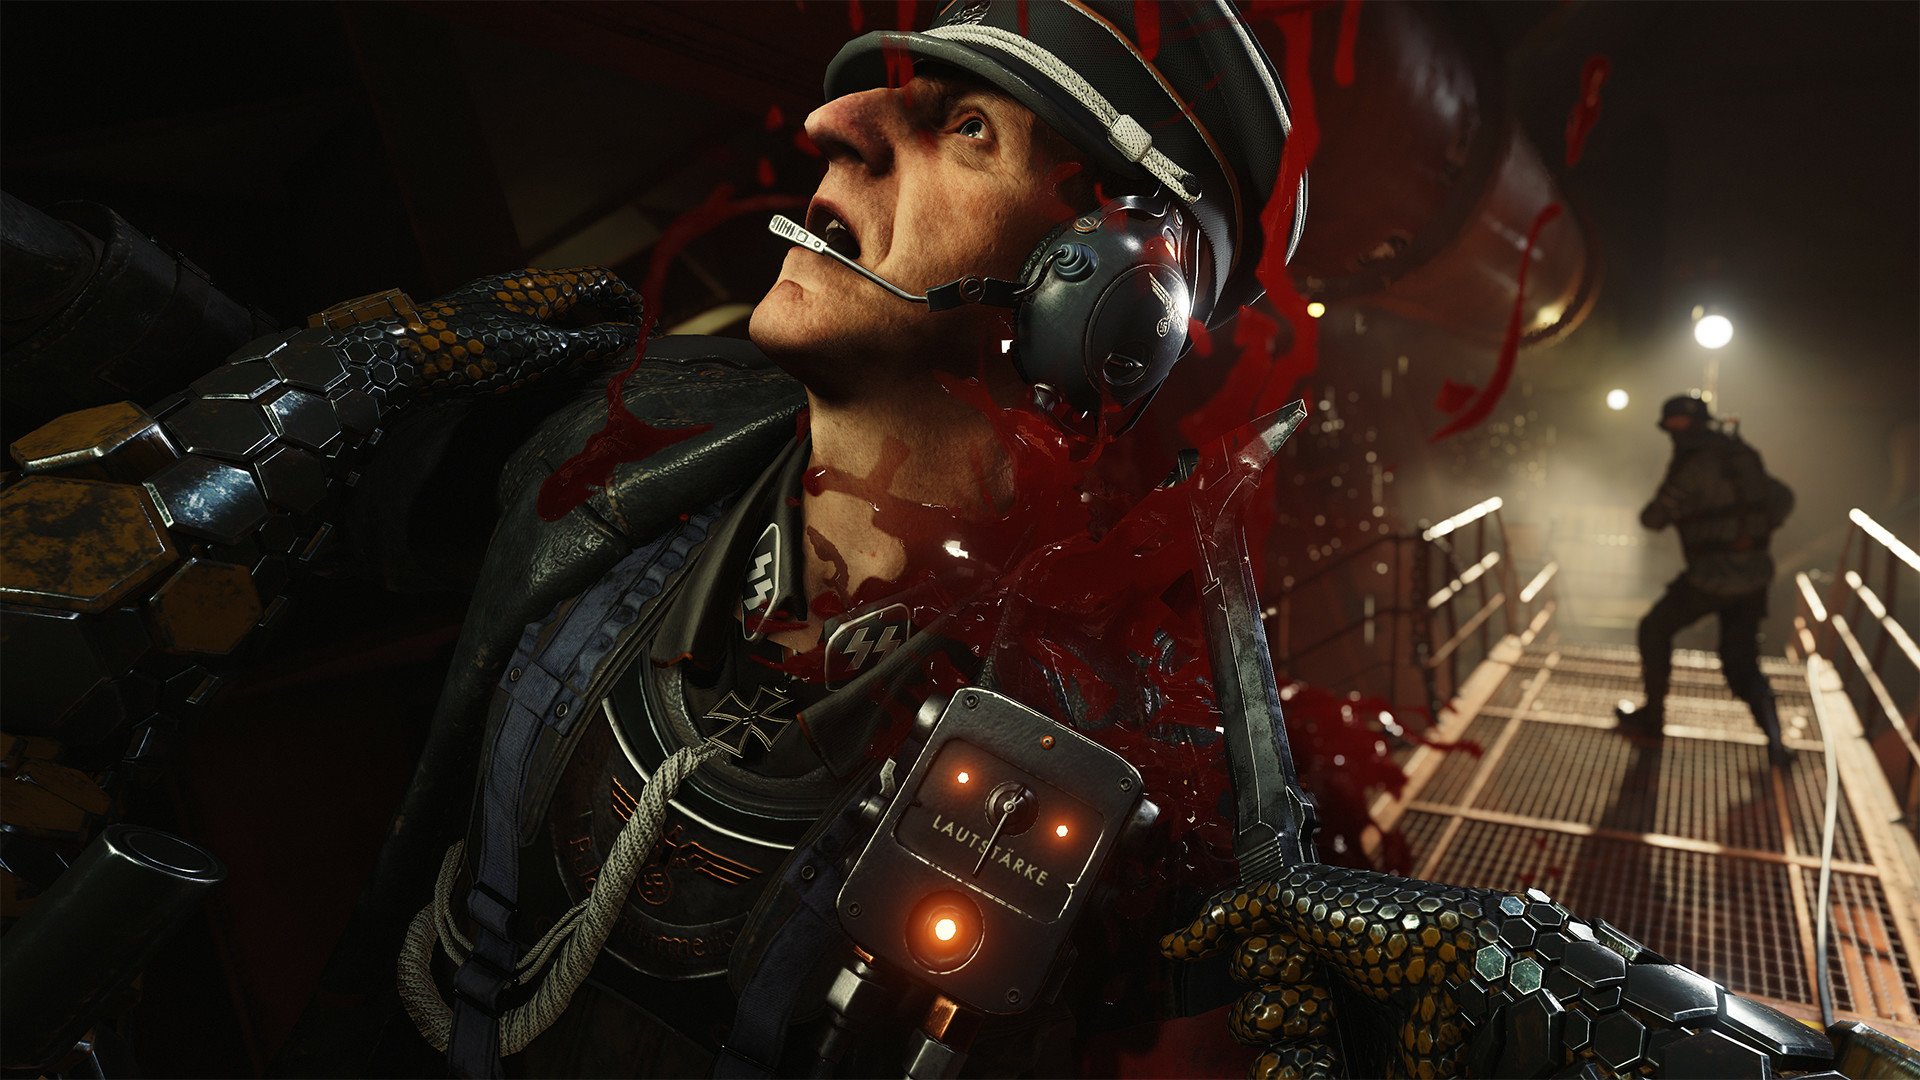 Wolfenstein 2 - The New Colossus (ENDING) - video Dailymotion